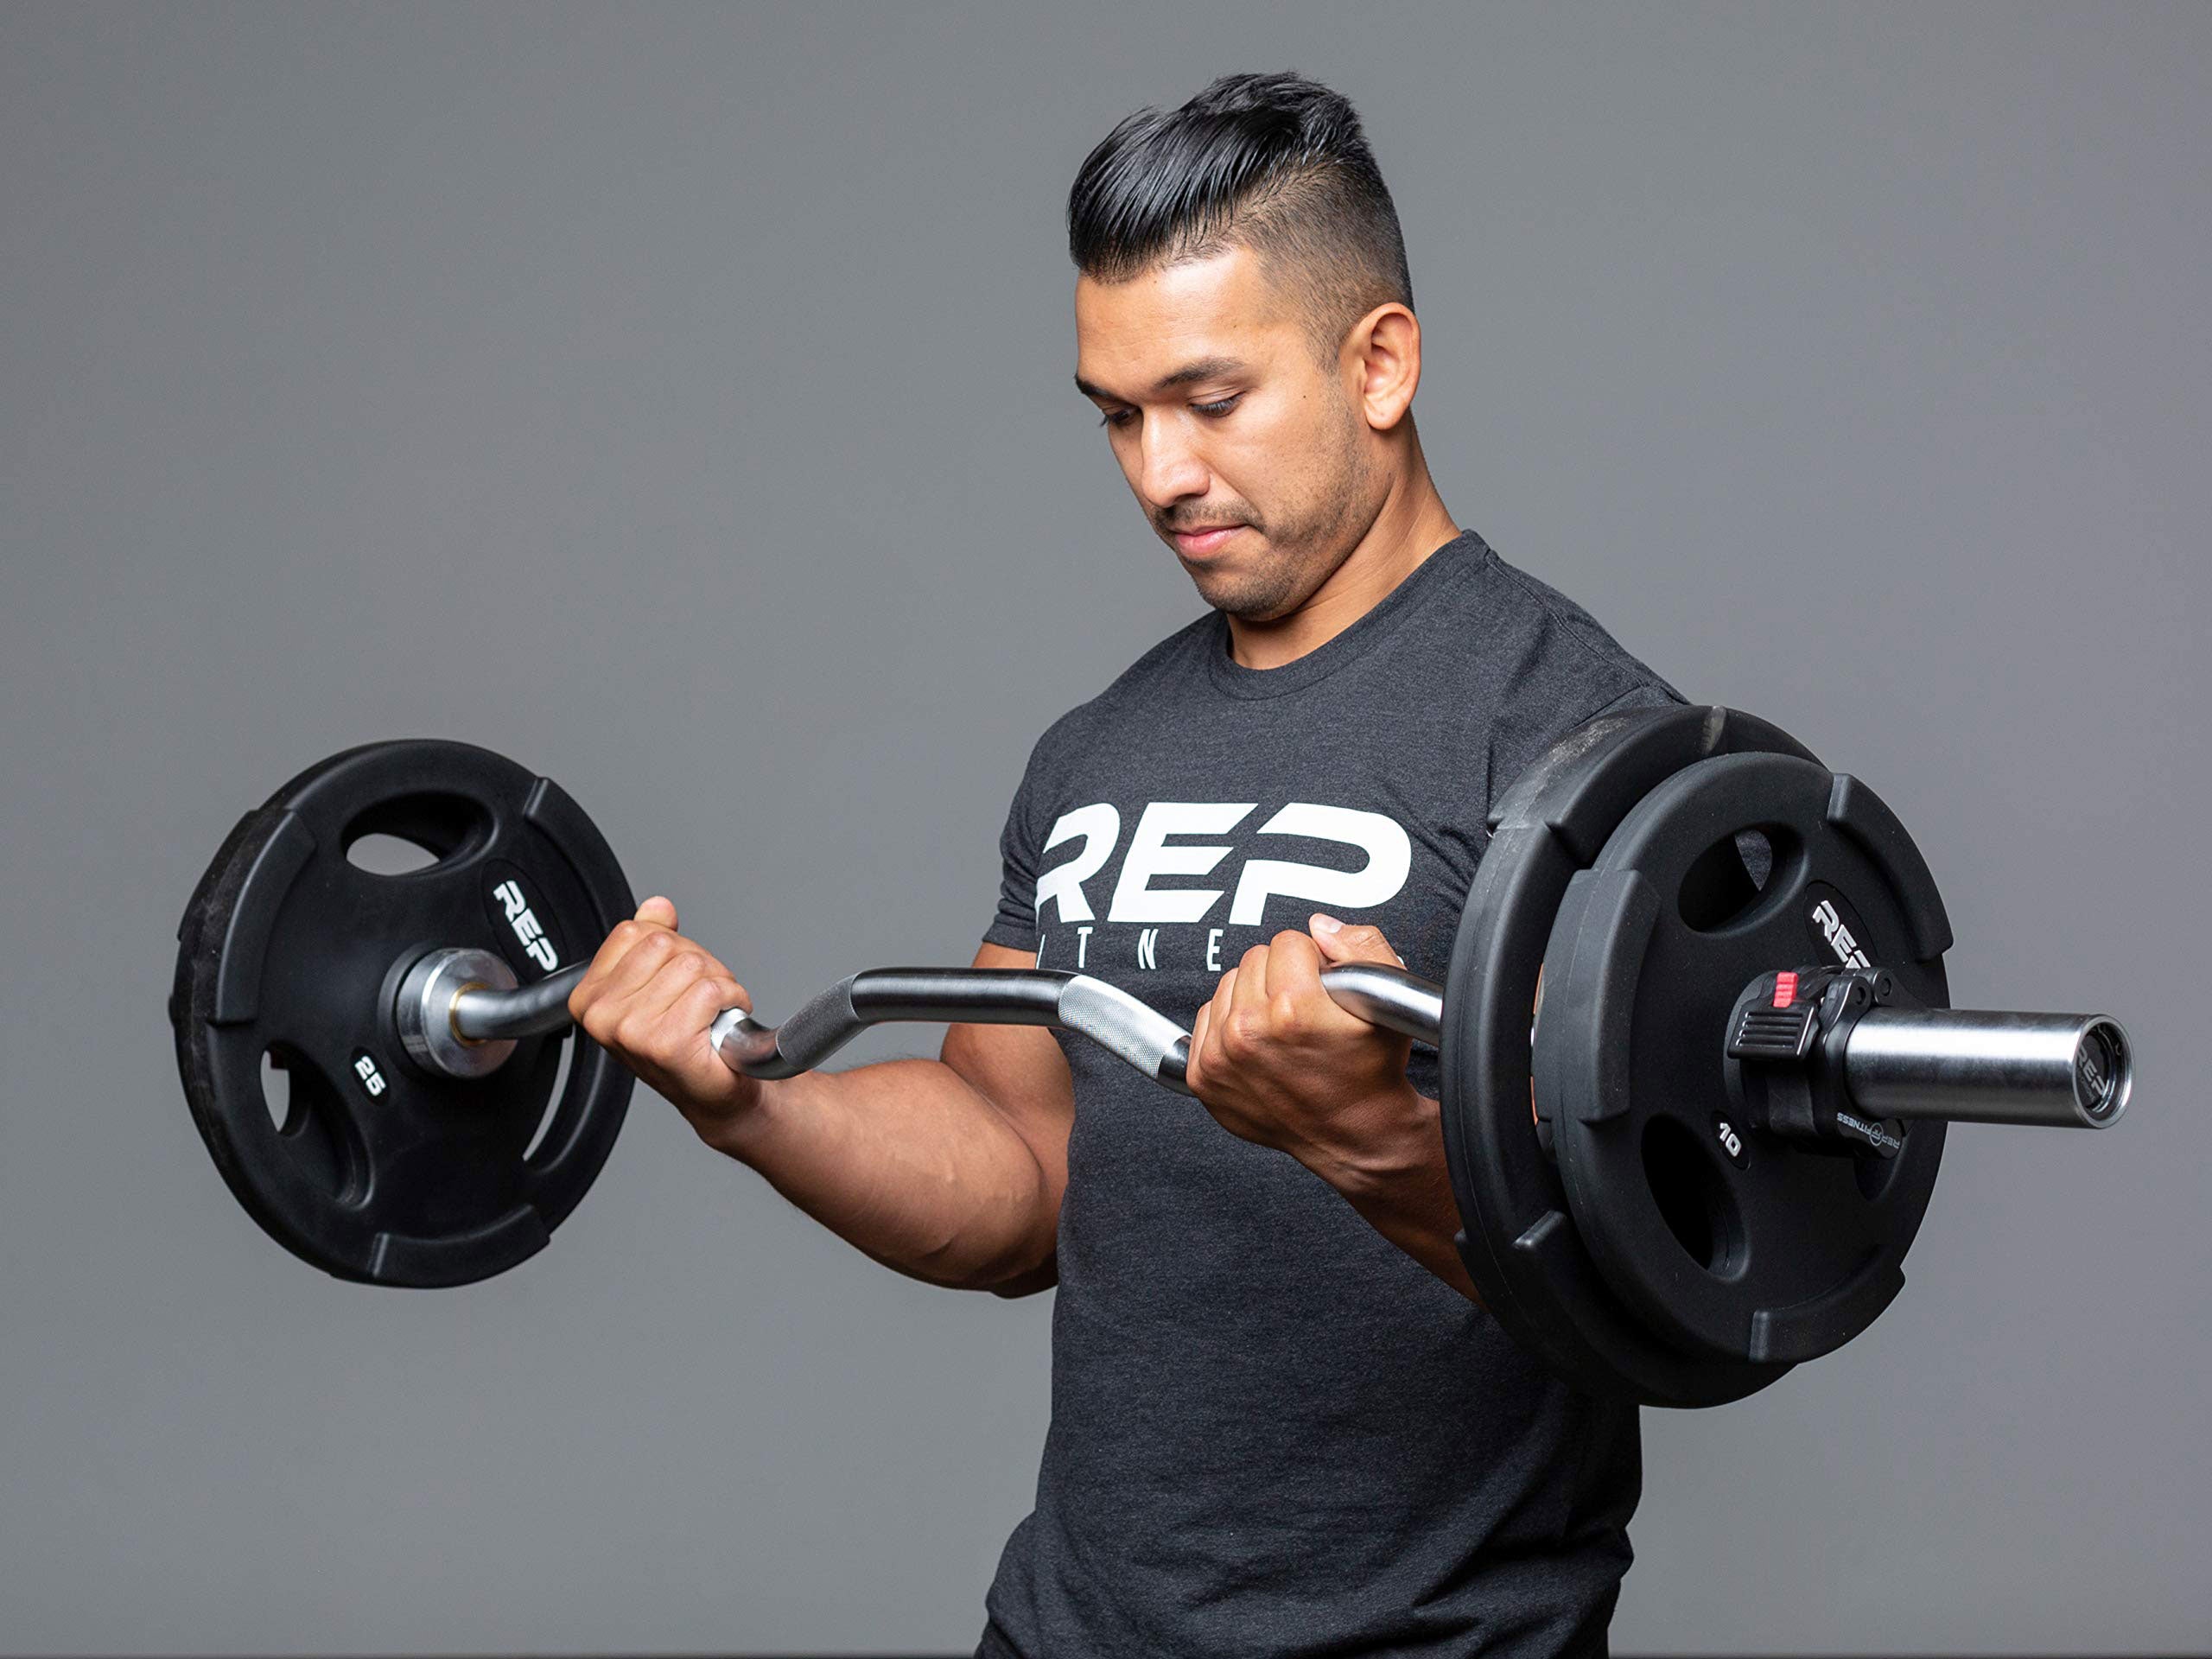 How to make barbell curls more effective